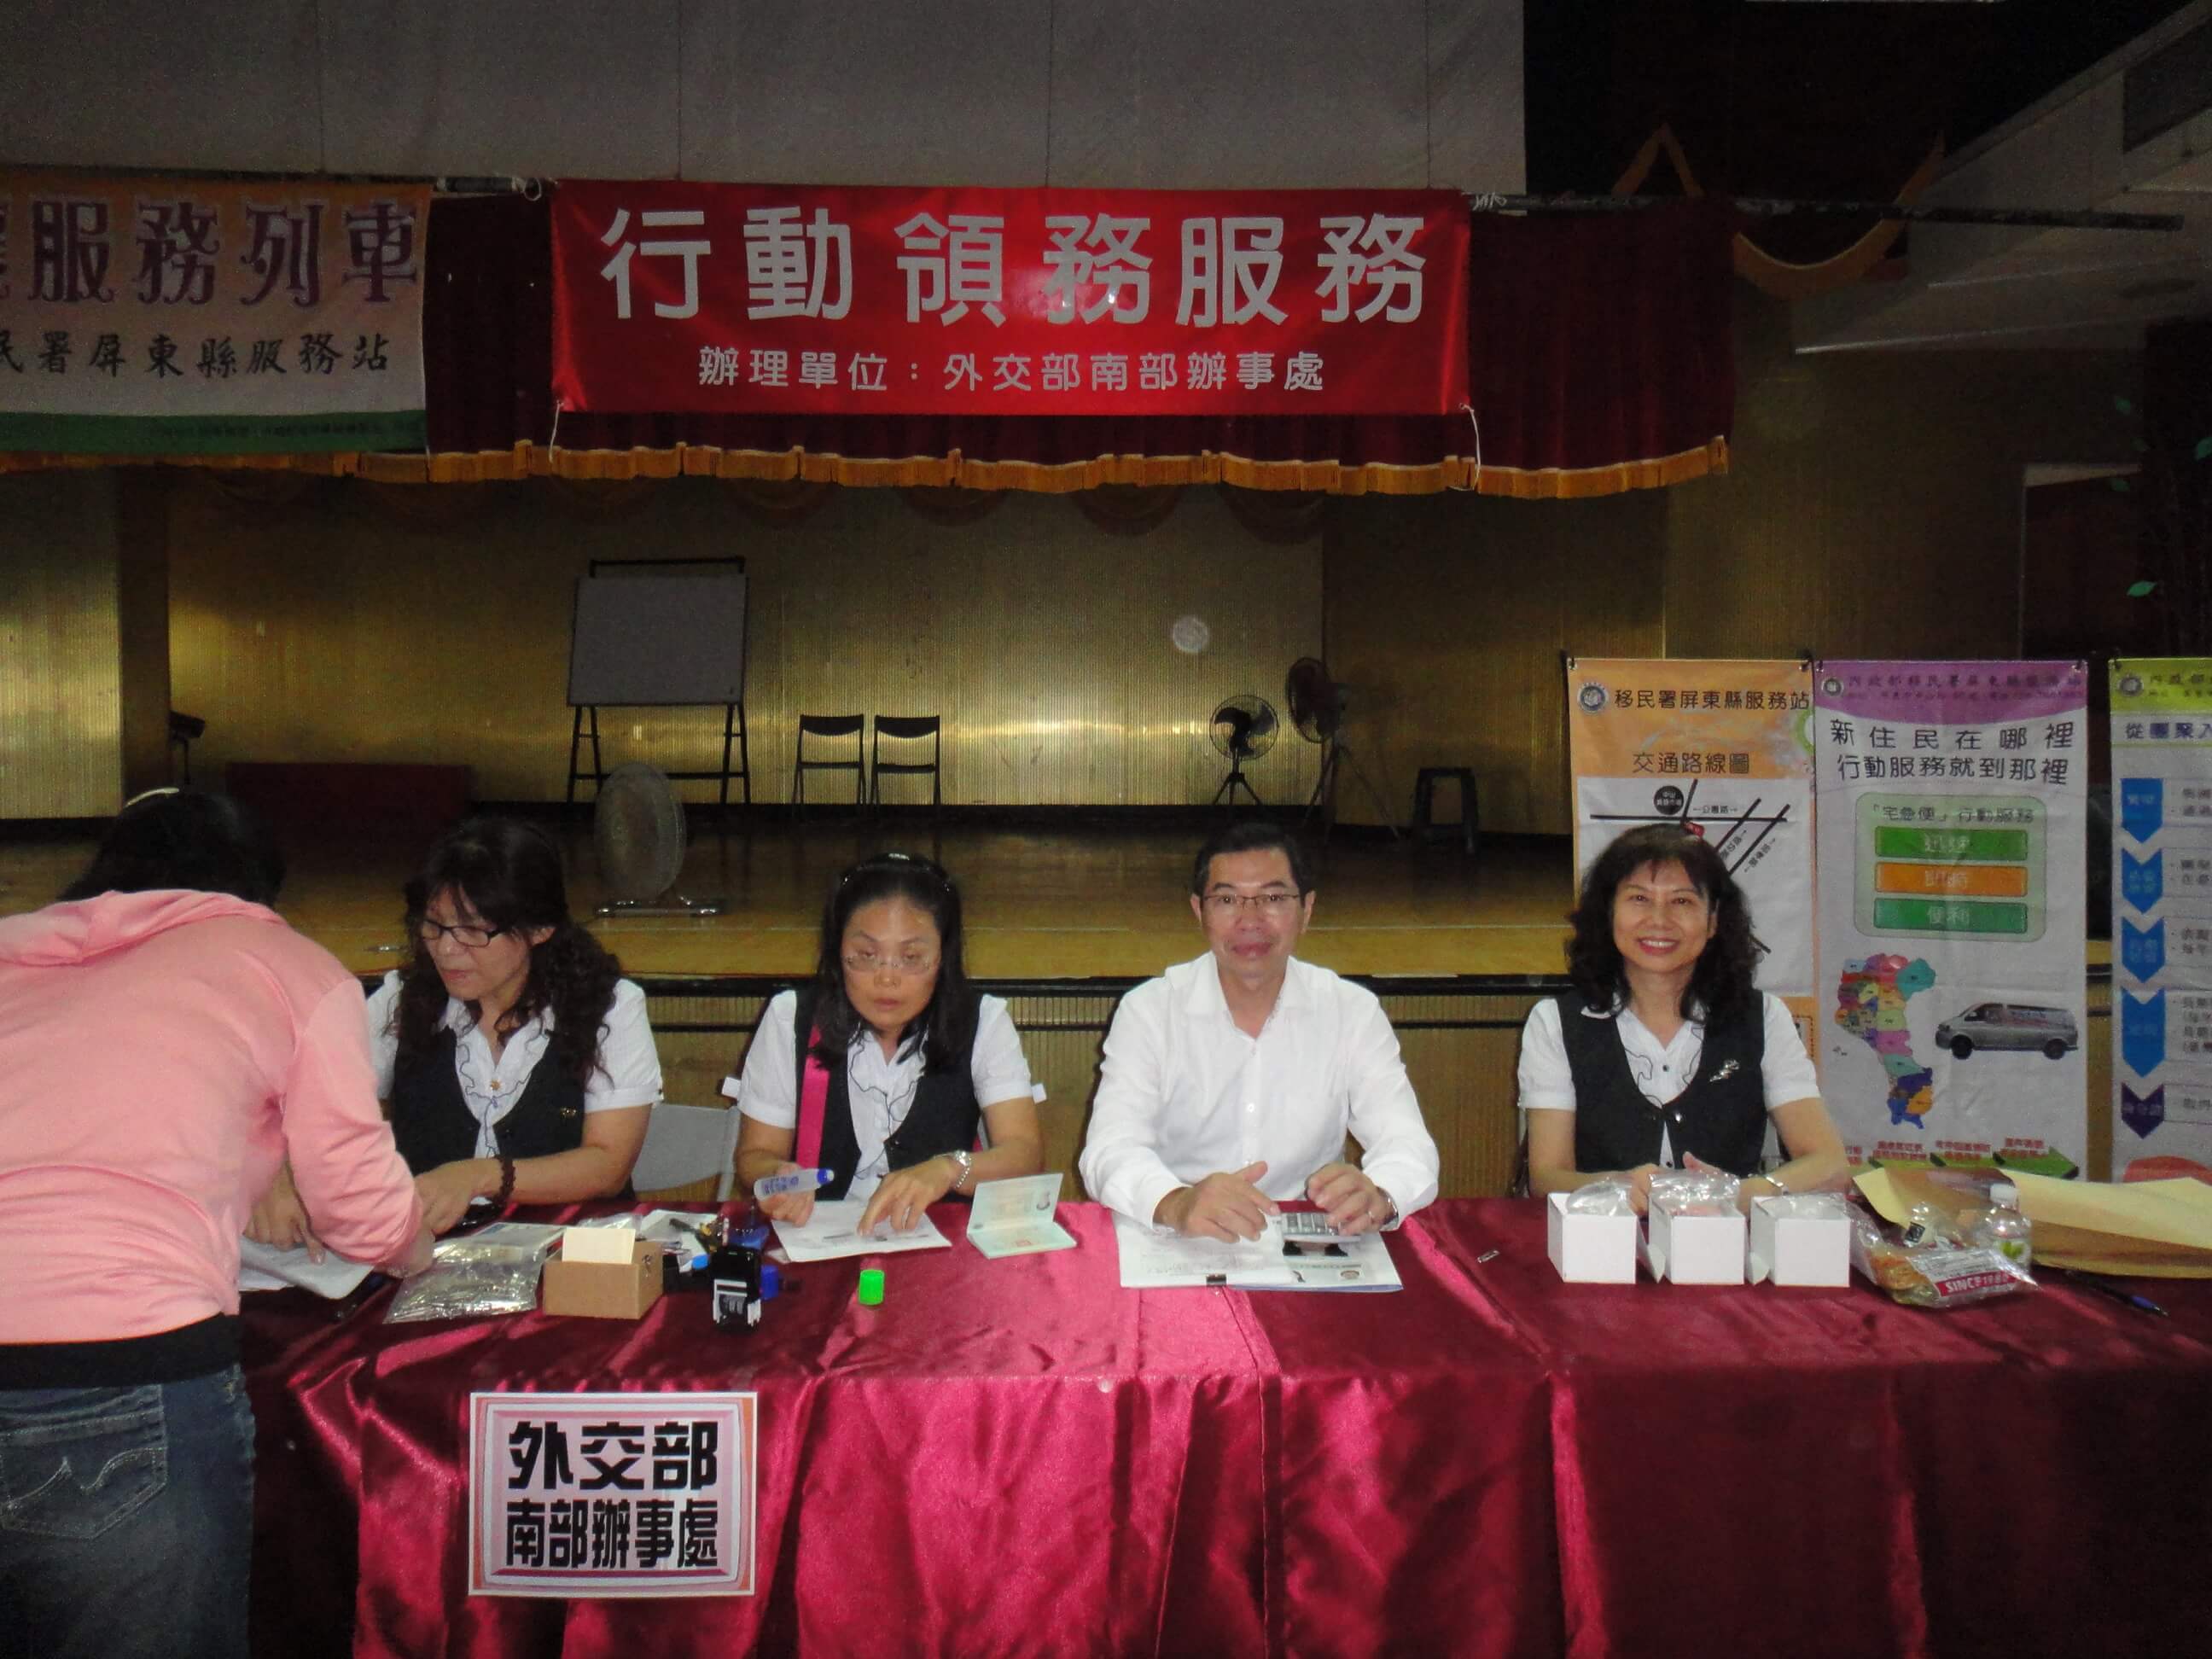 Consular Officers from Southern Taiwan Office, MOFA Visited Hengchun Town, Pingtung County in Remote Area to Provide Consular Services on October 23, 2014